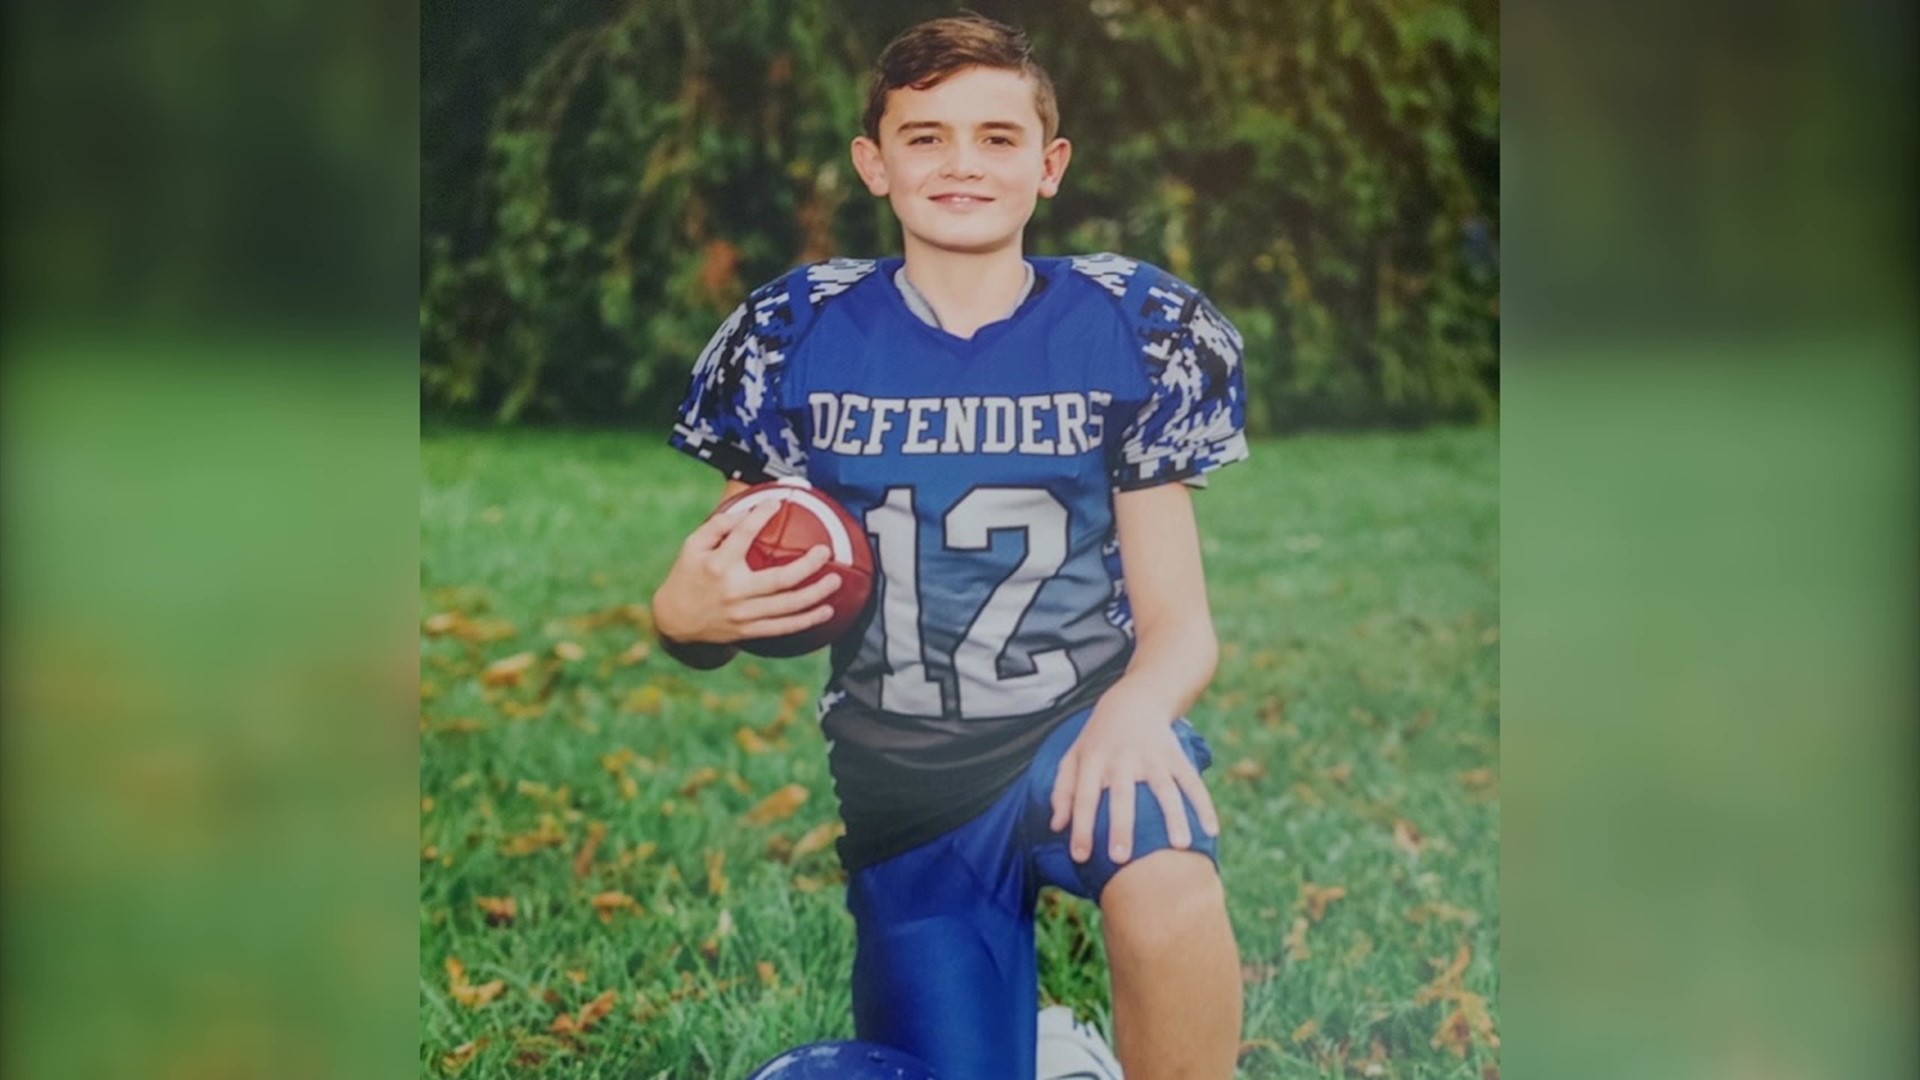 A Northumberland County community is mourning the death of an 11-year-old boy.